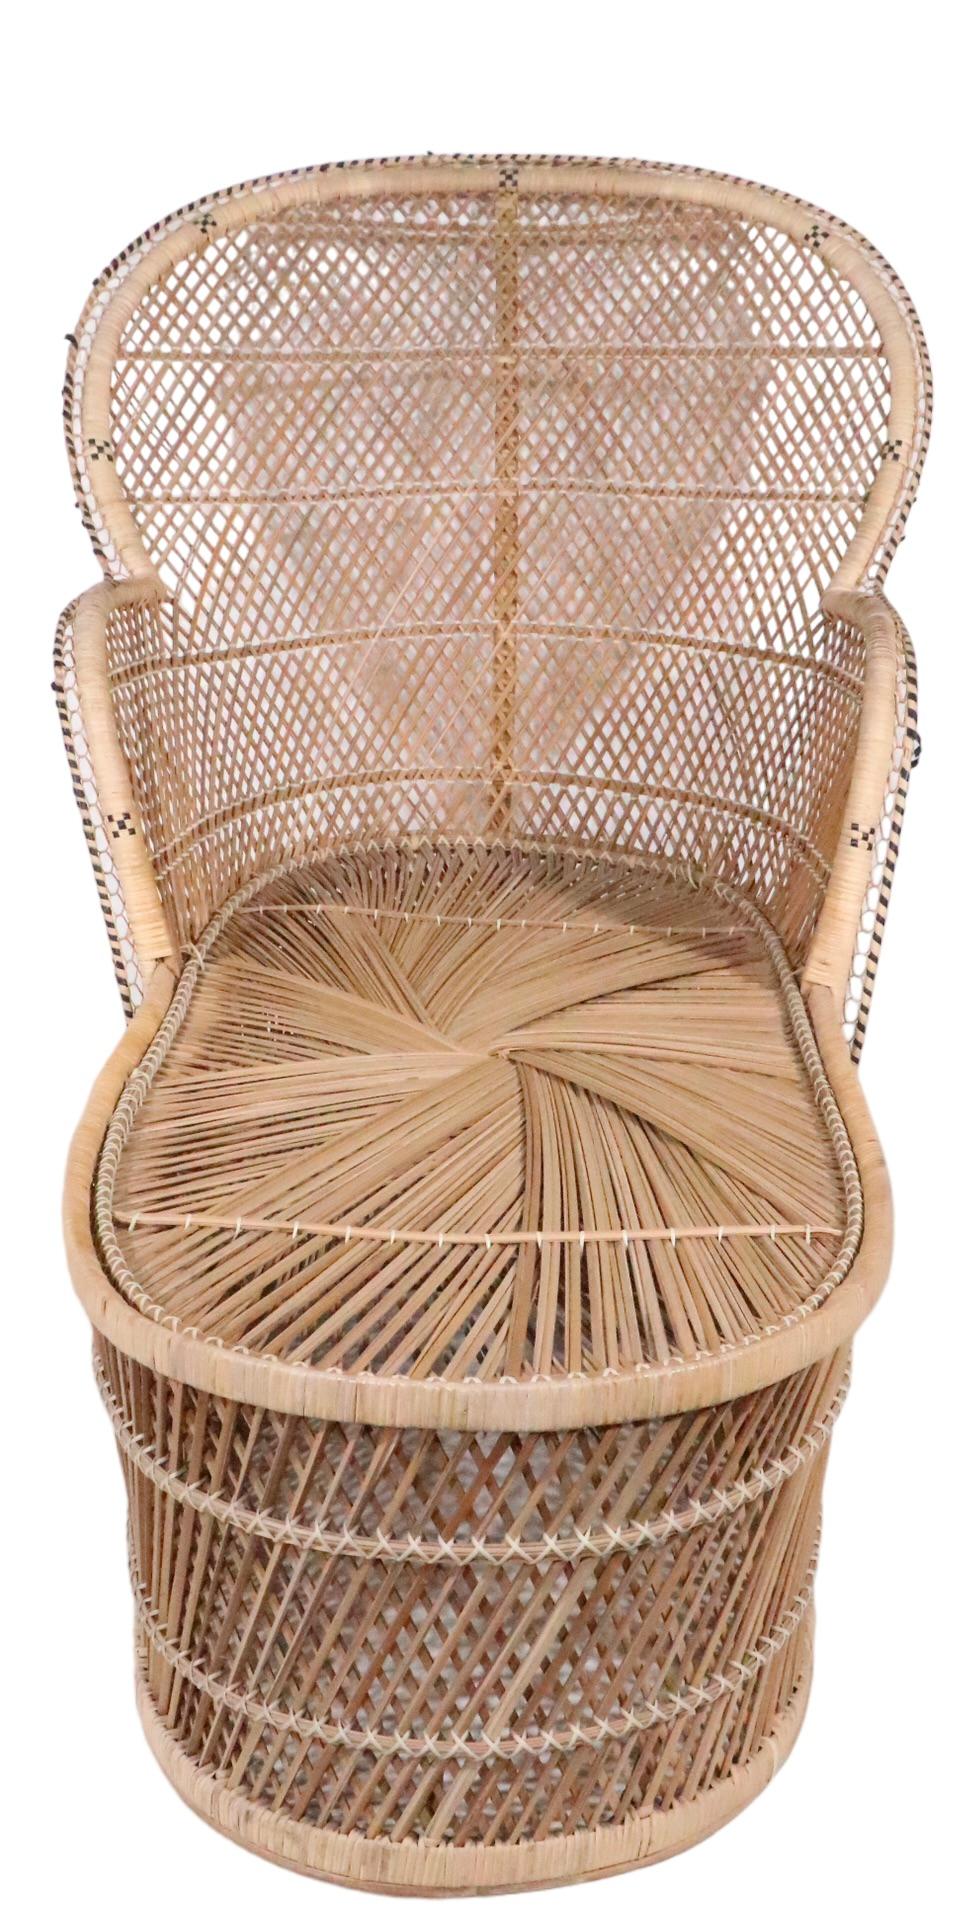 Woven Wicker Peacock Style Chaise Lounge c 1970's For Sale 2